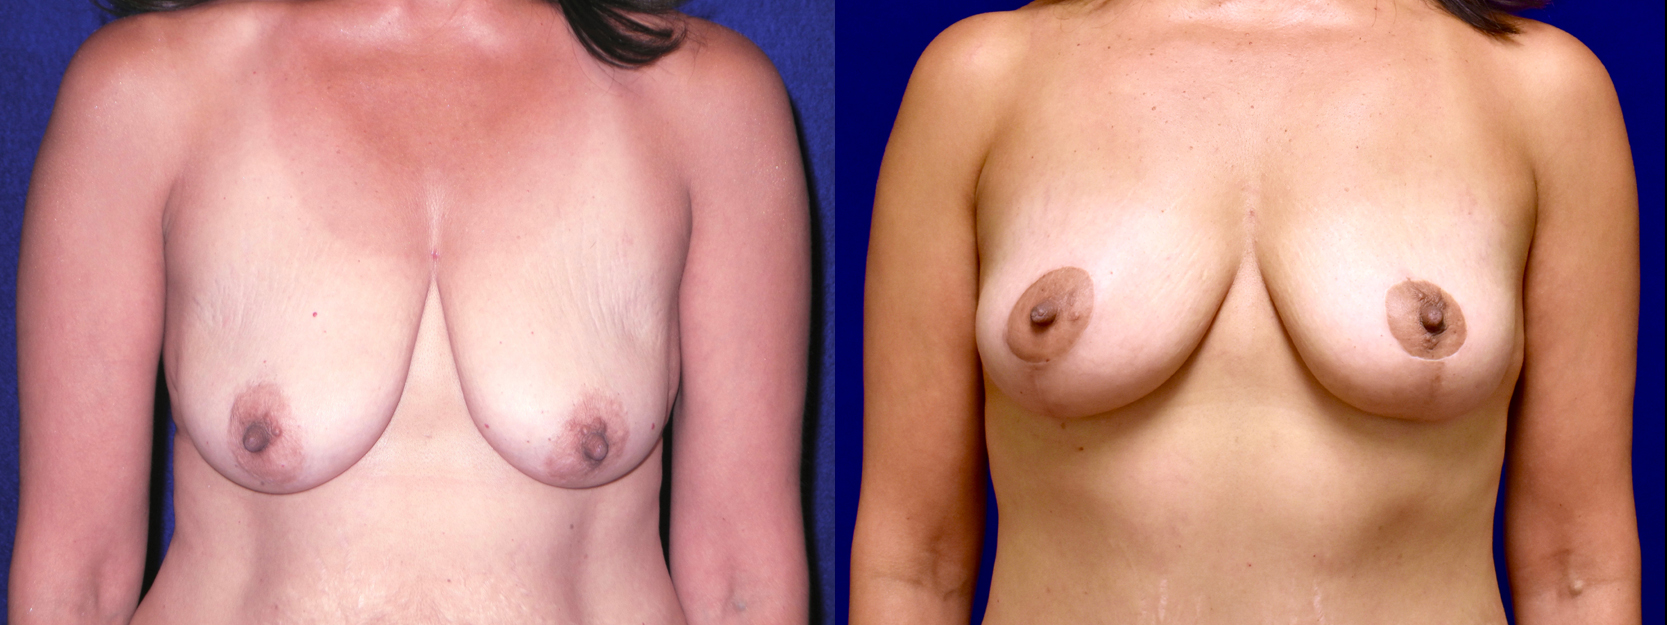 Frontal View - Breast Lift